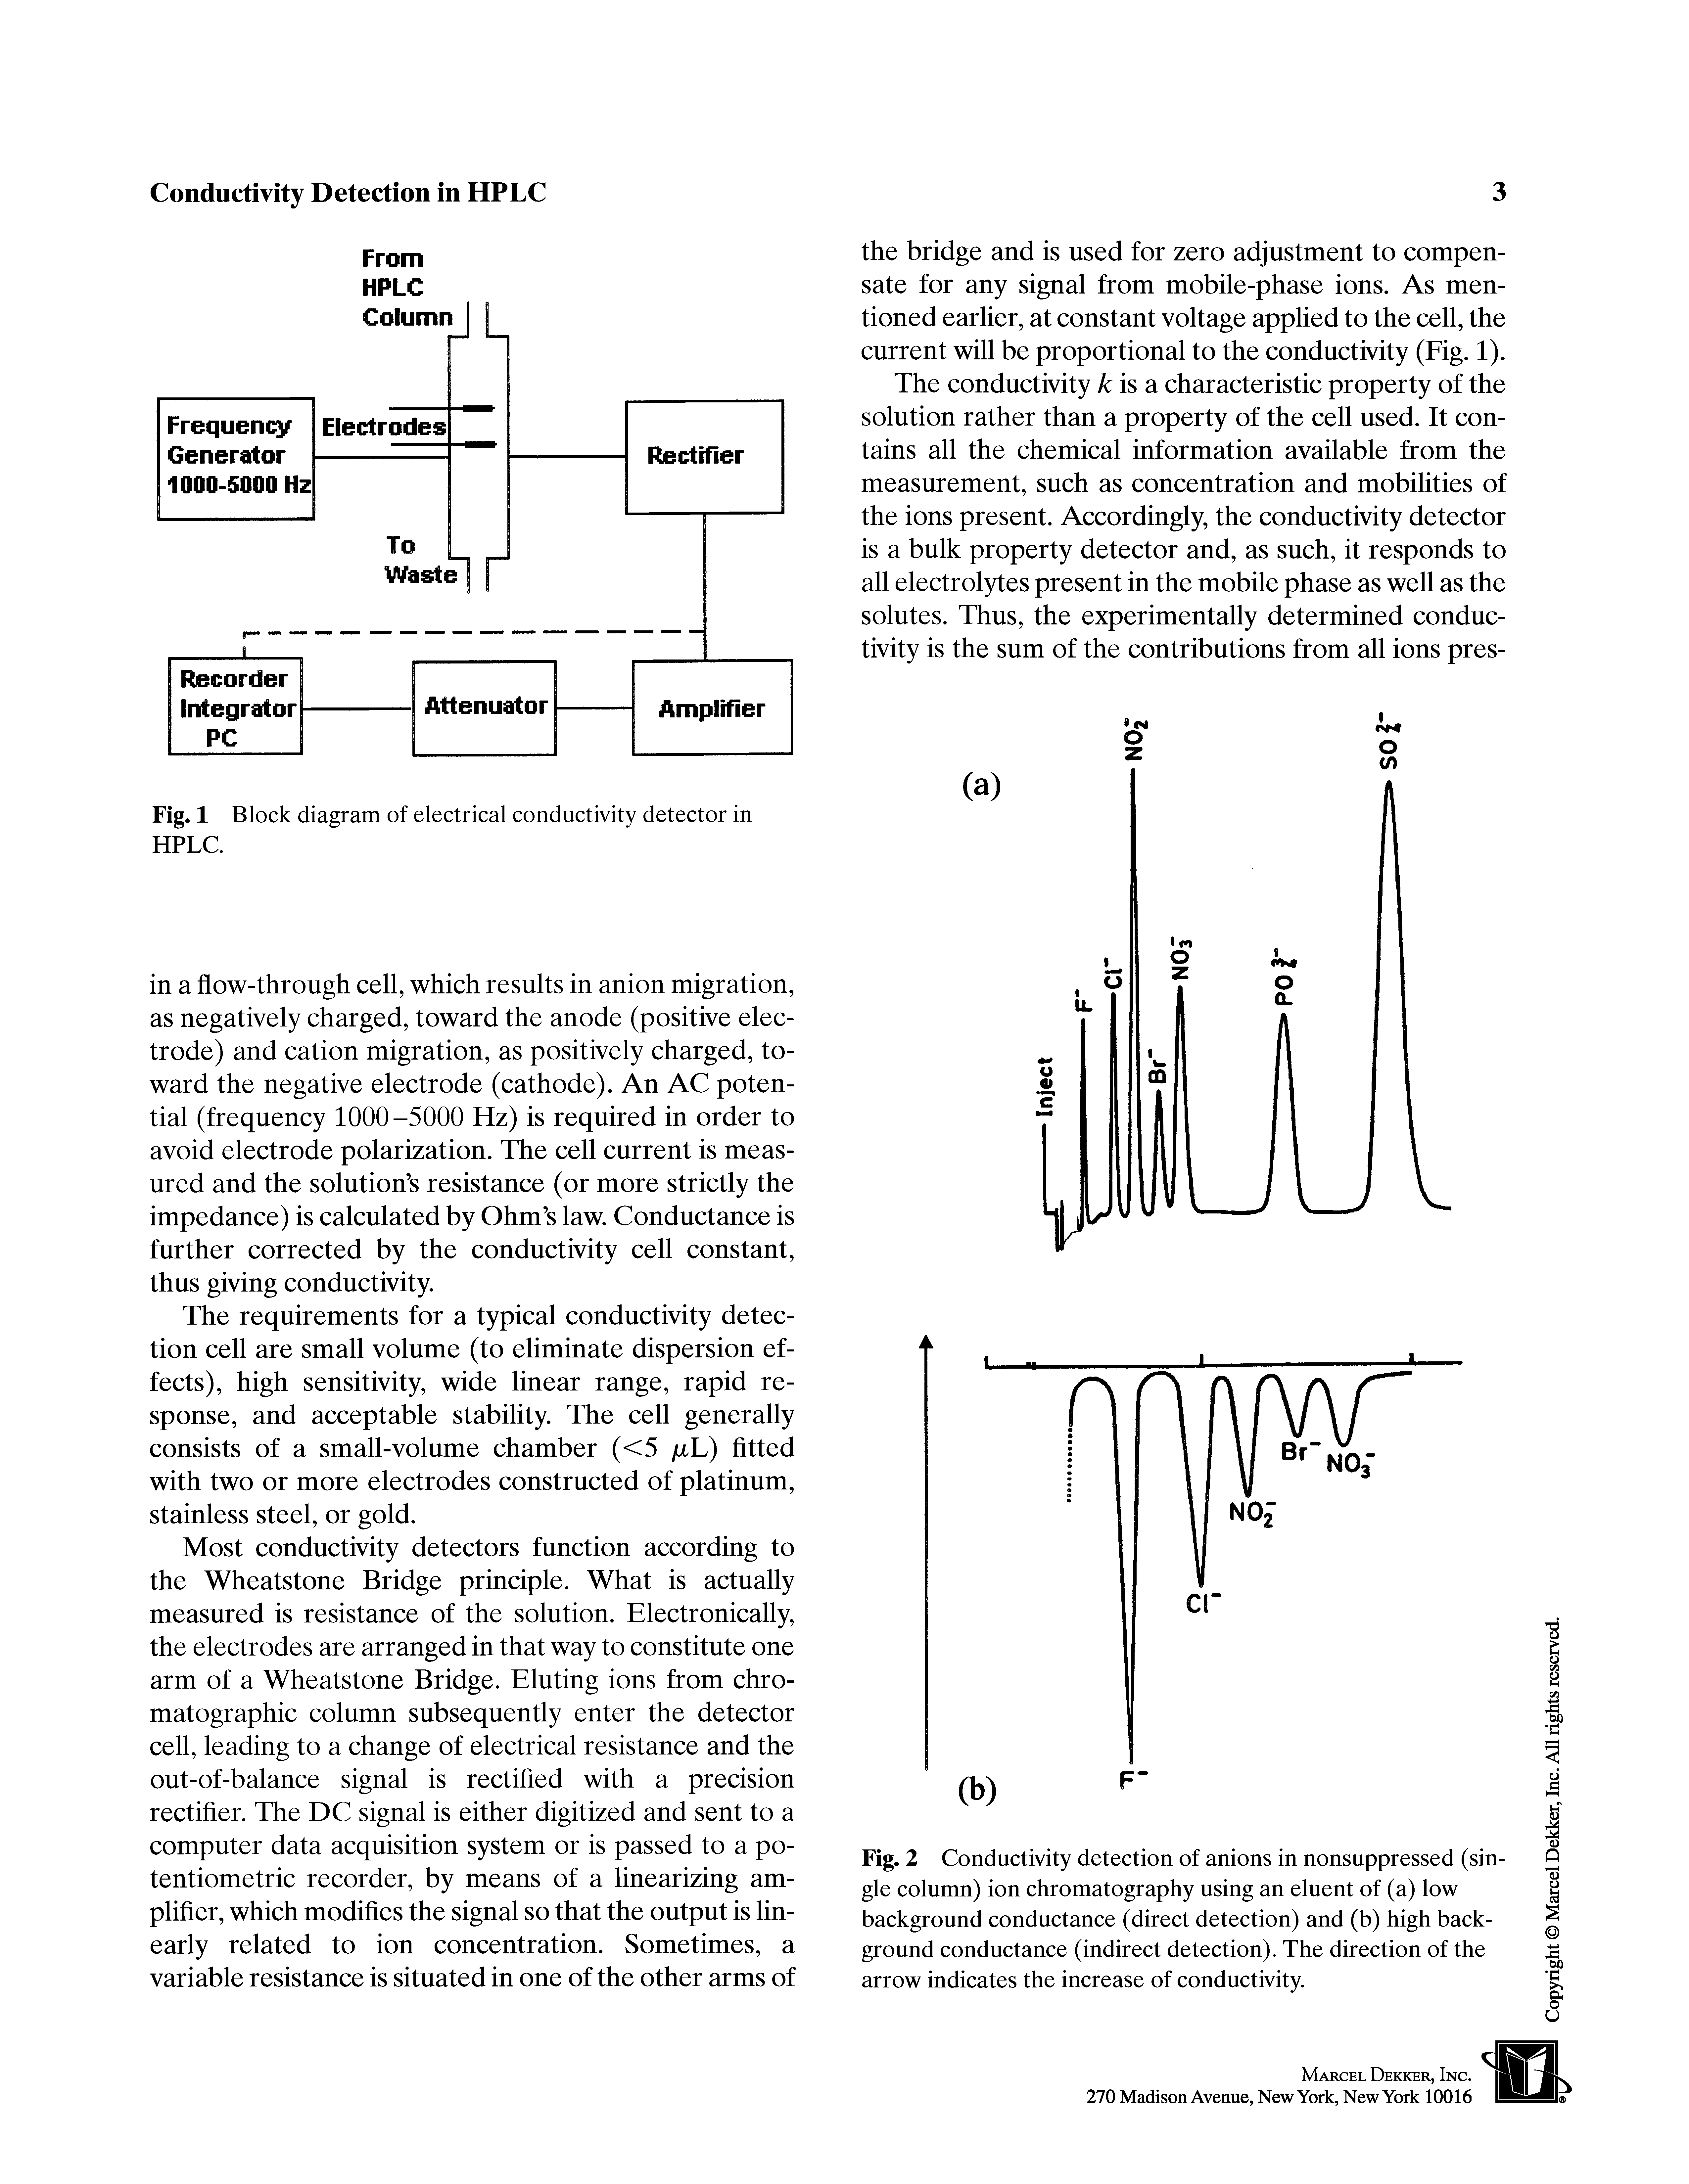 Fig. 2 Conductivity detection of anions in nonsuppressed (single column) ion chromatography using an eluent of (a) low background conductance (direct detection) and (b) high background conductance (indirect detection). The direction of the arrow indicates the increase of conductivity.